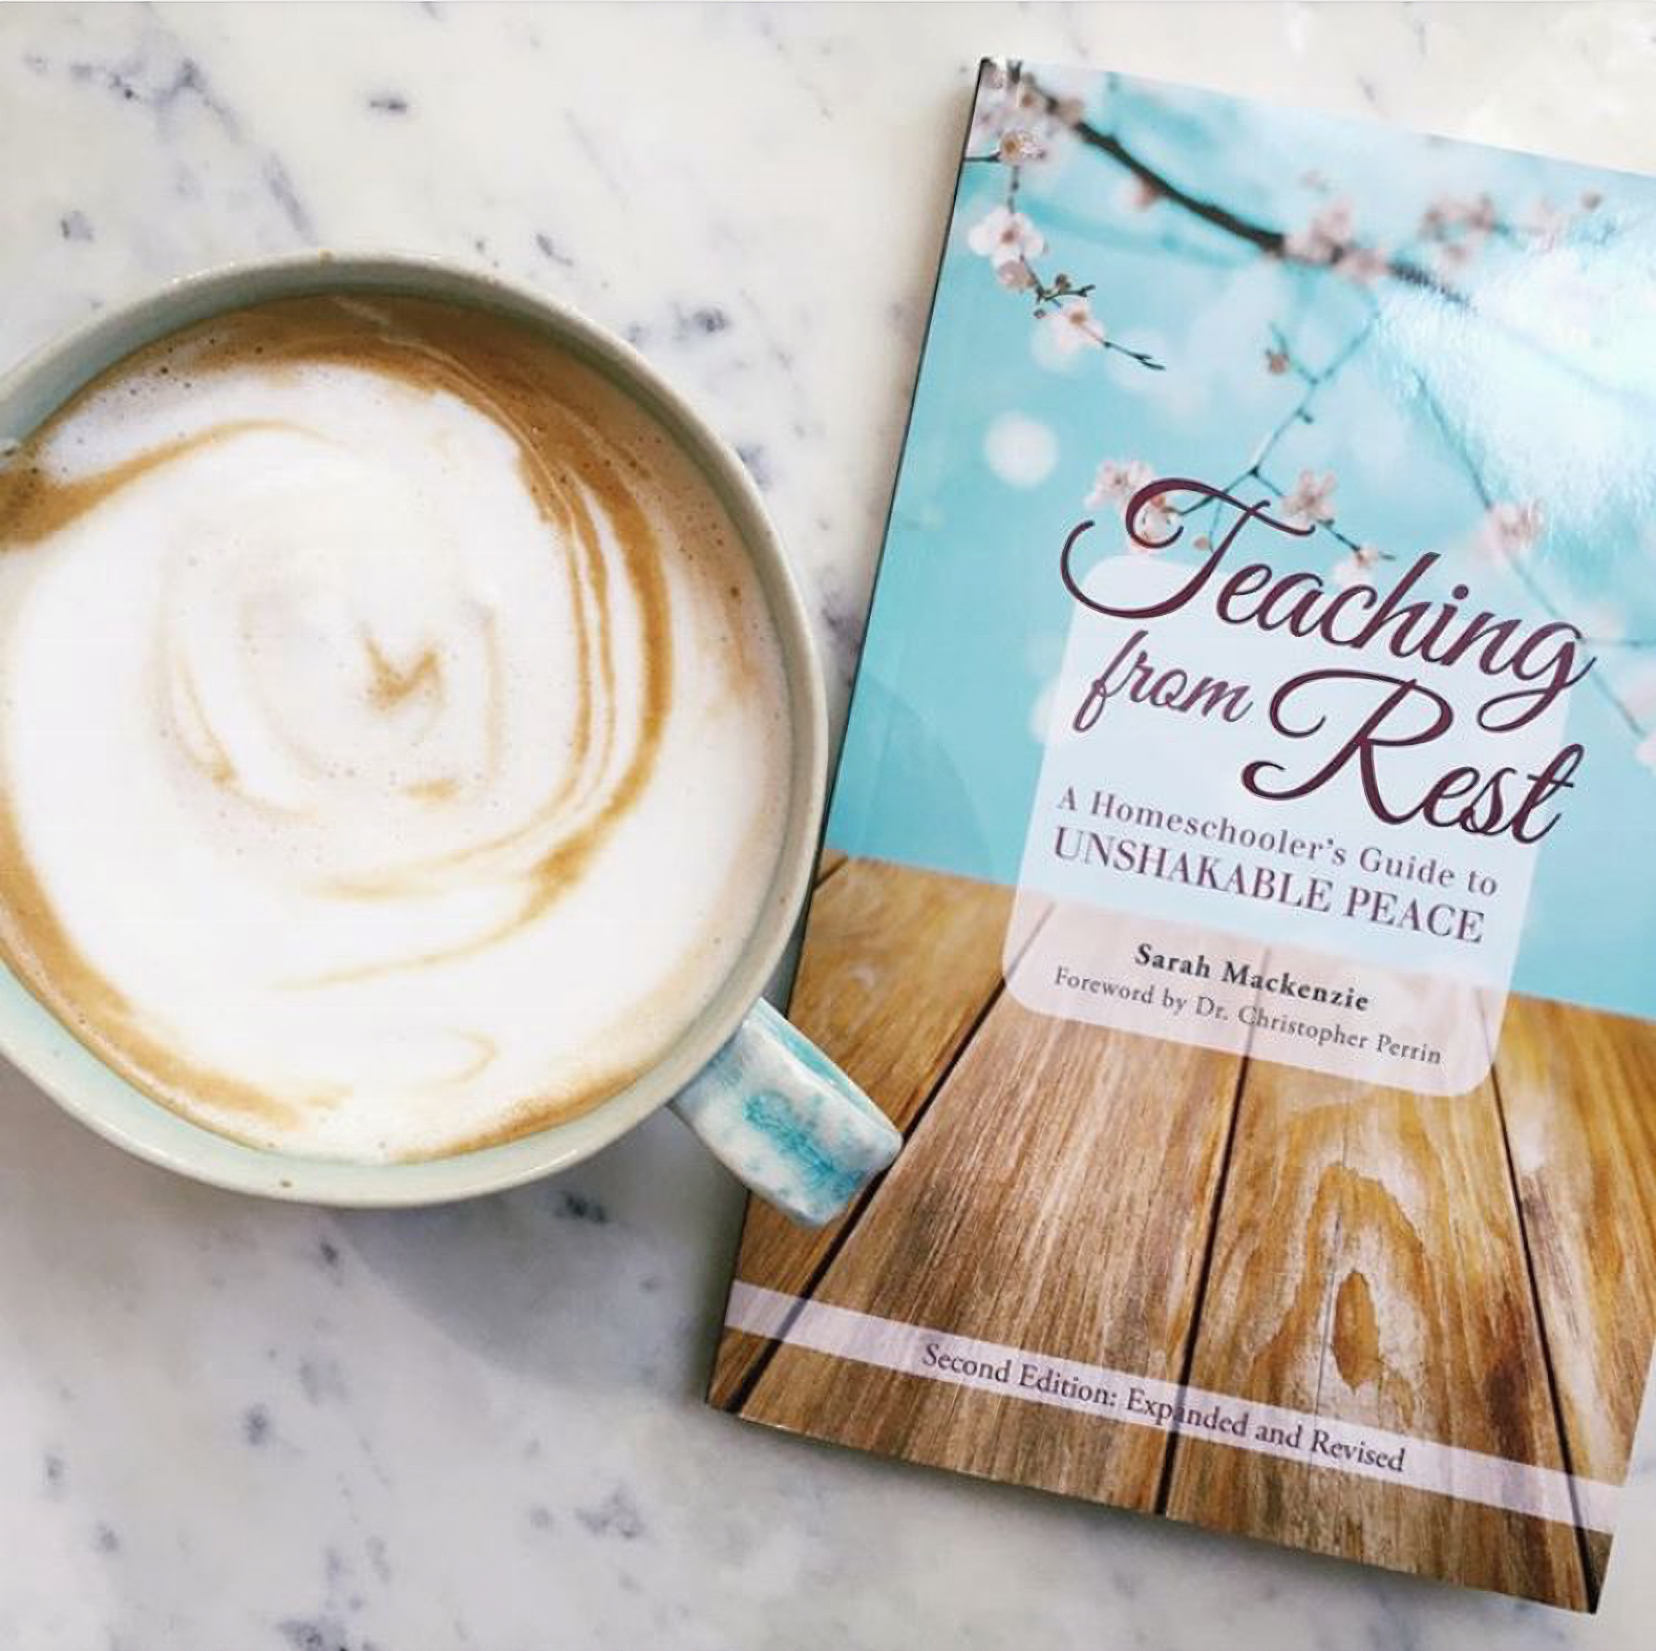 Homeschool Essentials: Teaching From Rest: A Homeschooler’s Guide to Unshakeable Peace by Sarah MacKenzie